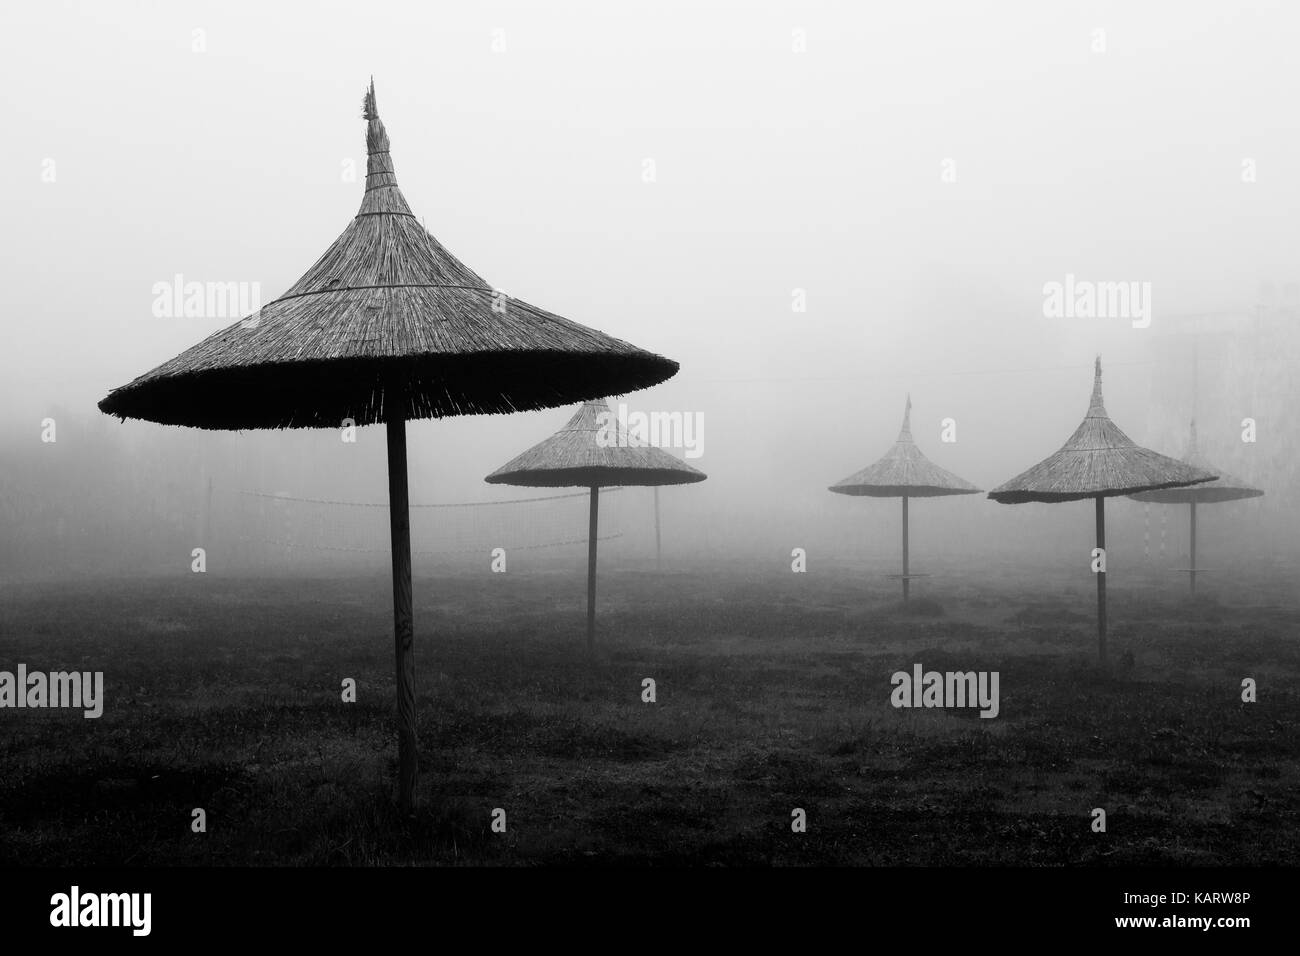 A beach in winter, with umbrella made of canes in the middle of fog and mist Stock Photo